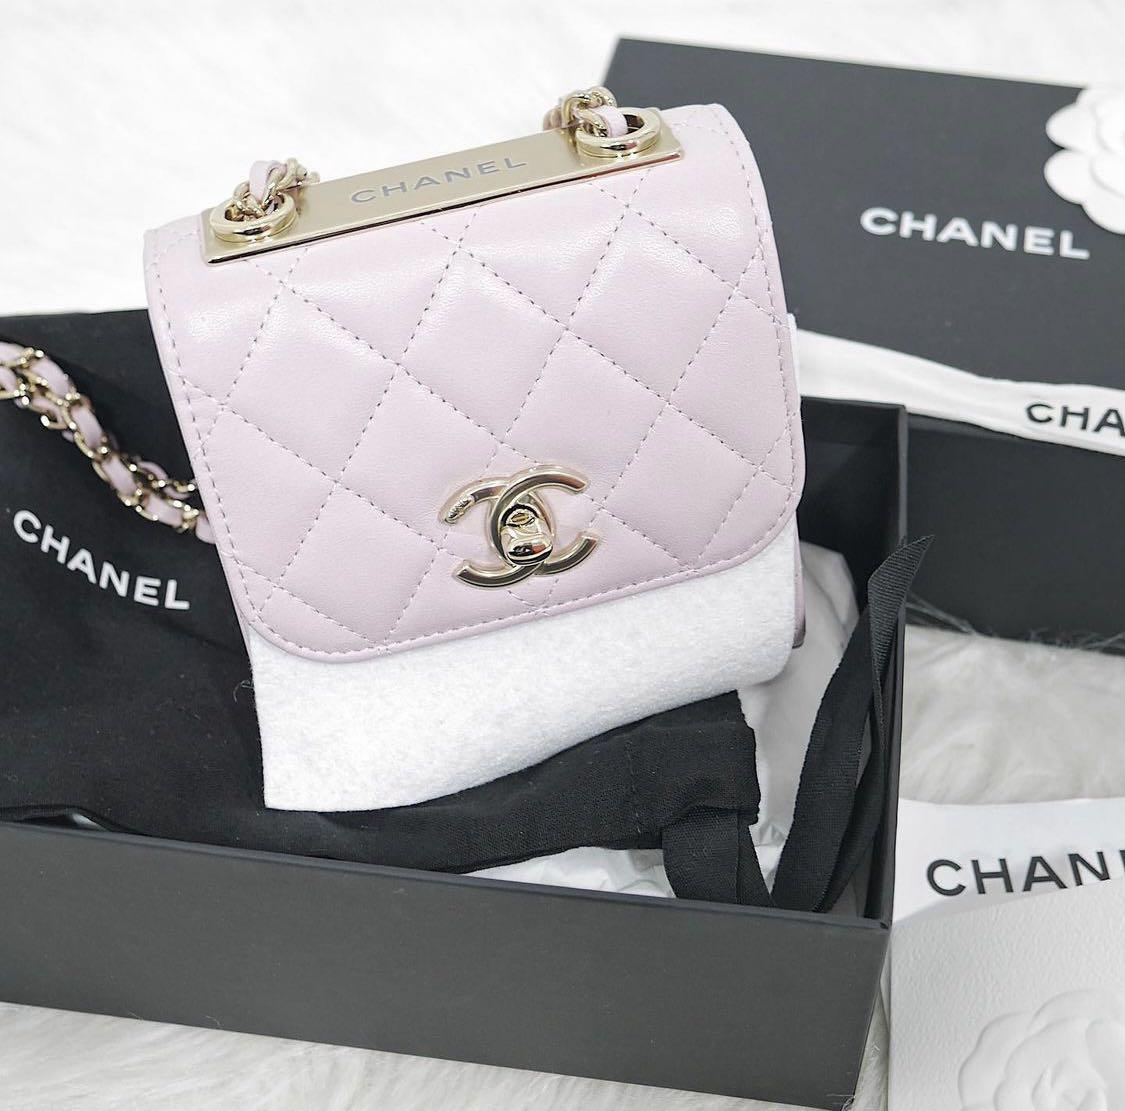 CHANEL 22P MINI VANITY WITH MIRROR IN ROSE CLAIRE CAVIAR [UNBOXING